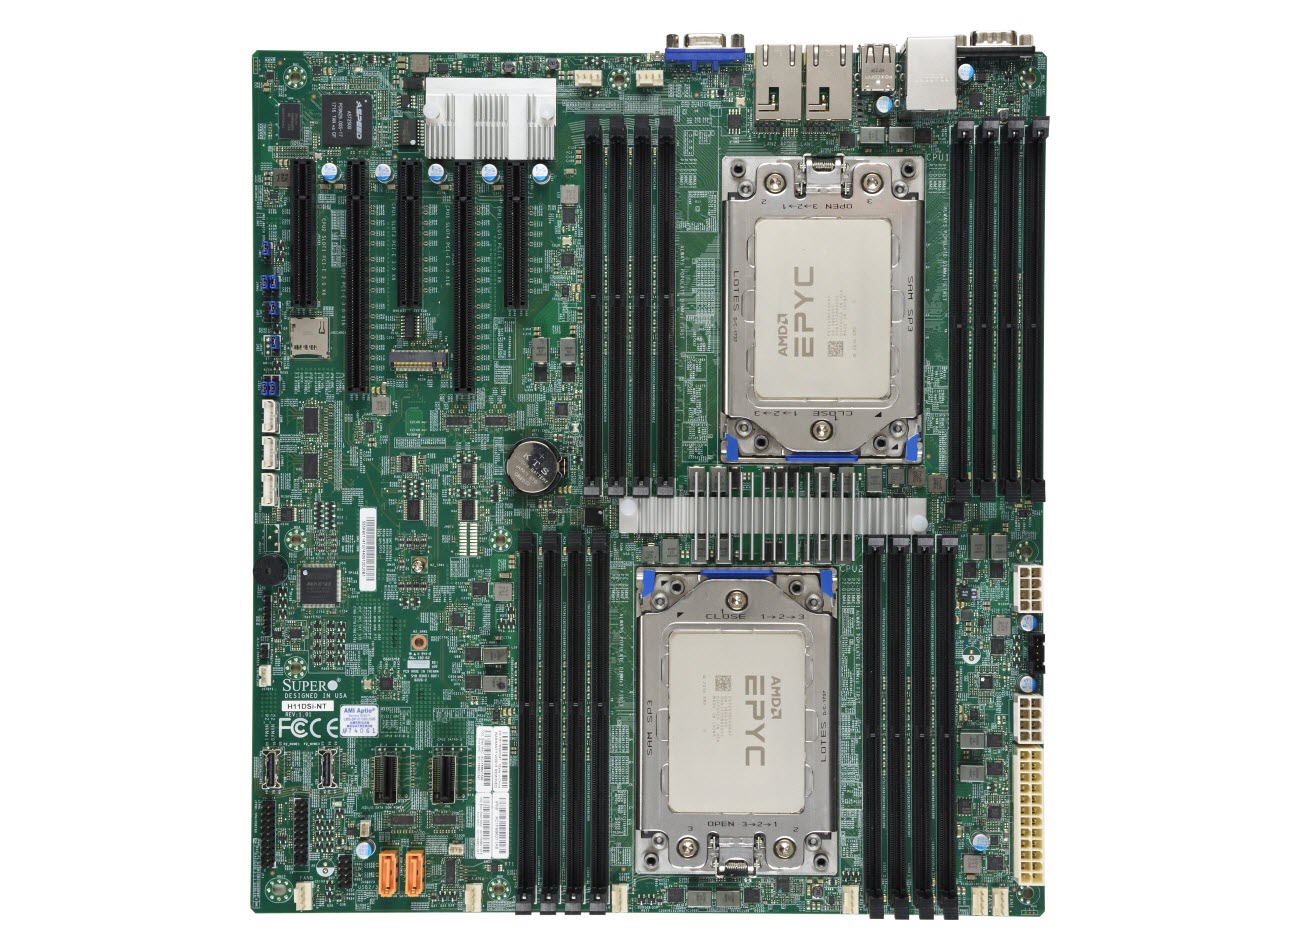 SUPERMICRO MBD-H11DSI-NT Mainboard, Factory Installed with 2 x AMD EPYC  Rome 64 Cores 7702 CPU